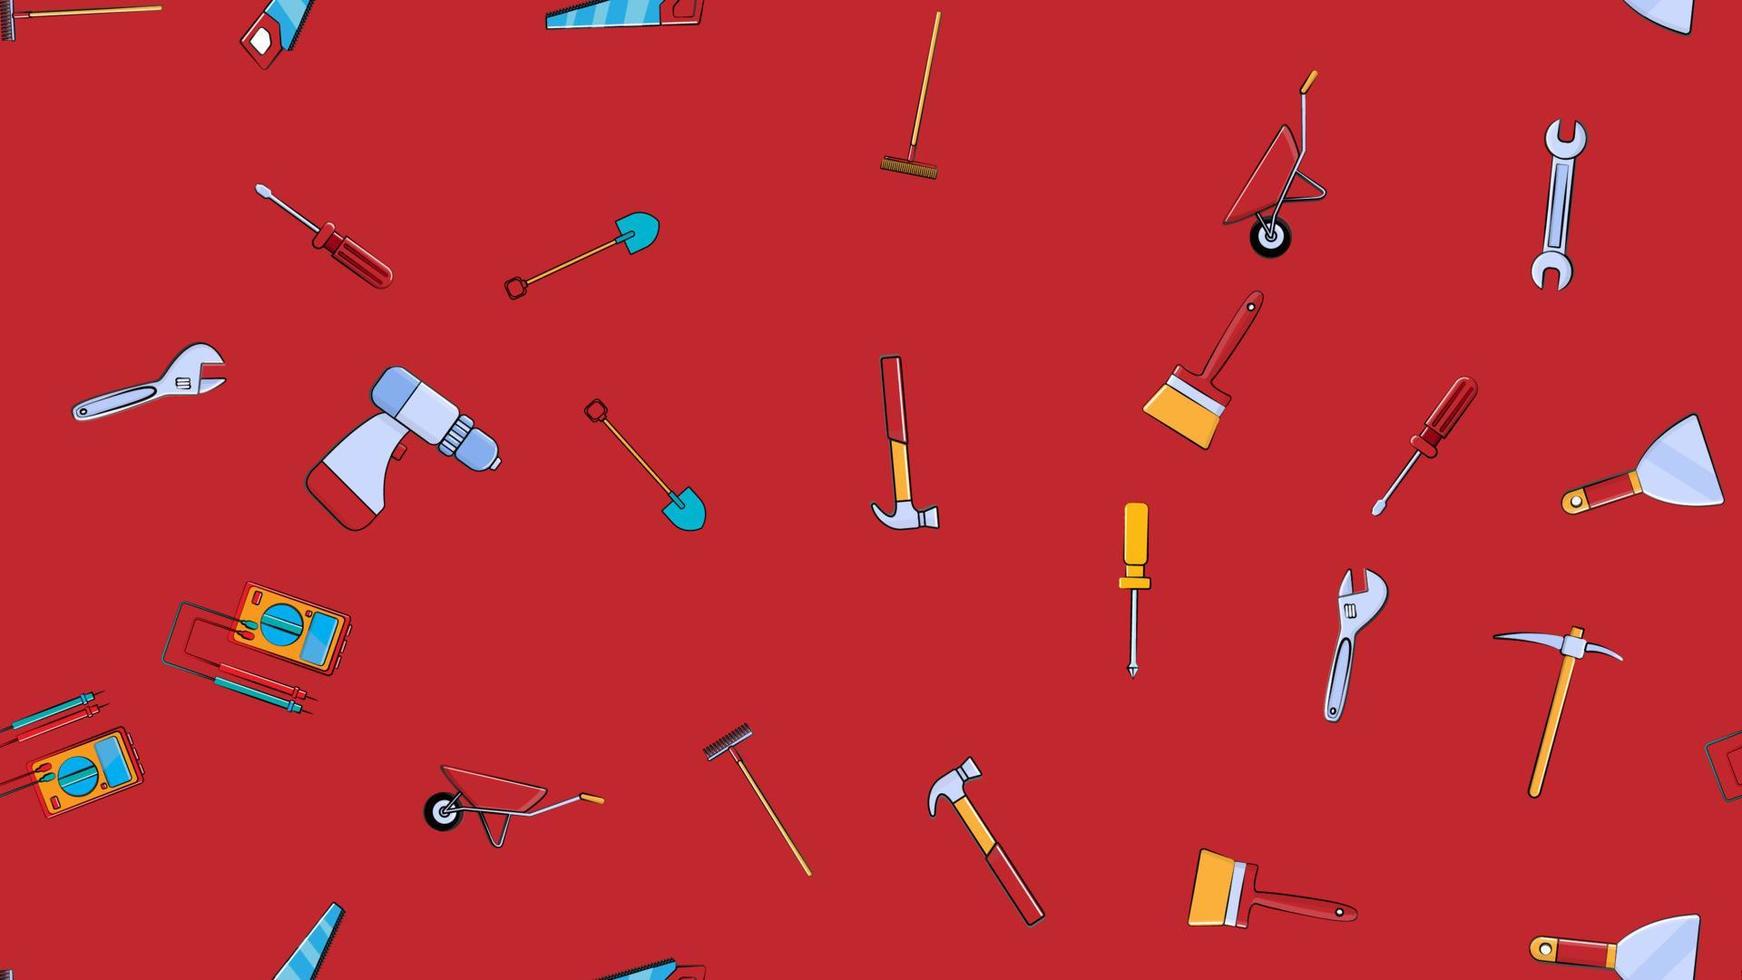 Texture, seamless pattern from a set of construction tools for repair hammer, shovel, screwdriver, wrench, tester, brush, saw, trolley, trowel, ladder on a red background. Vector illustration